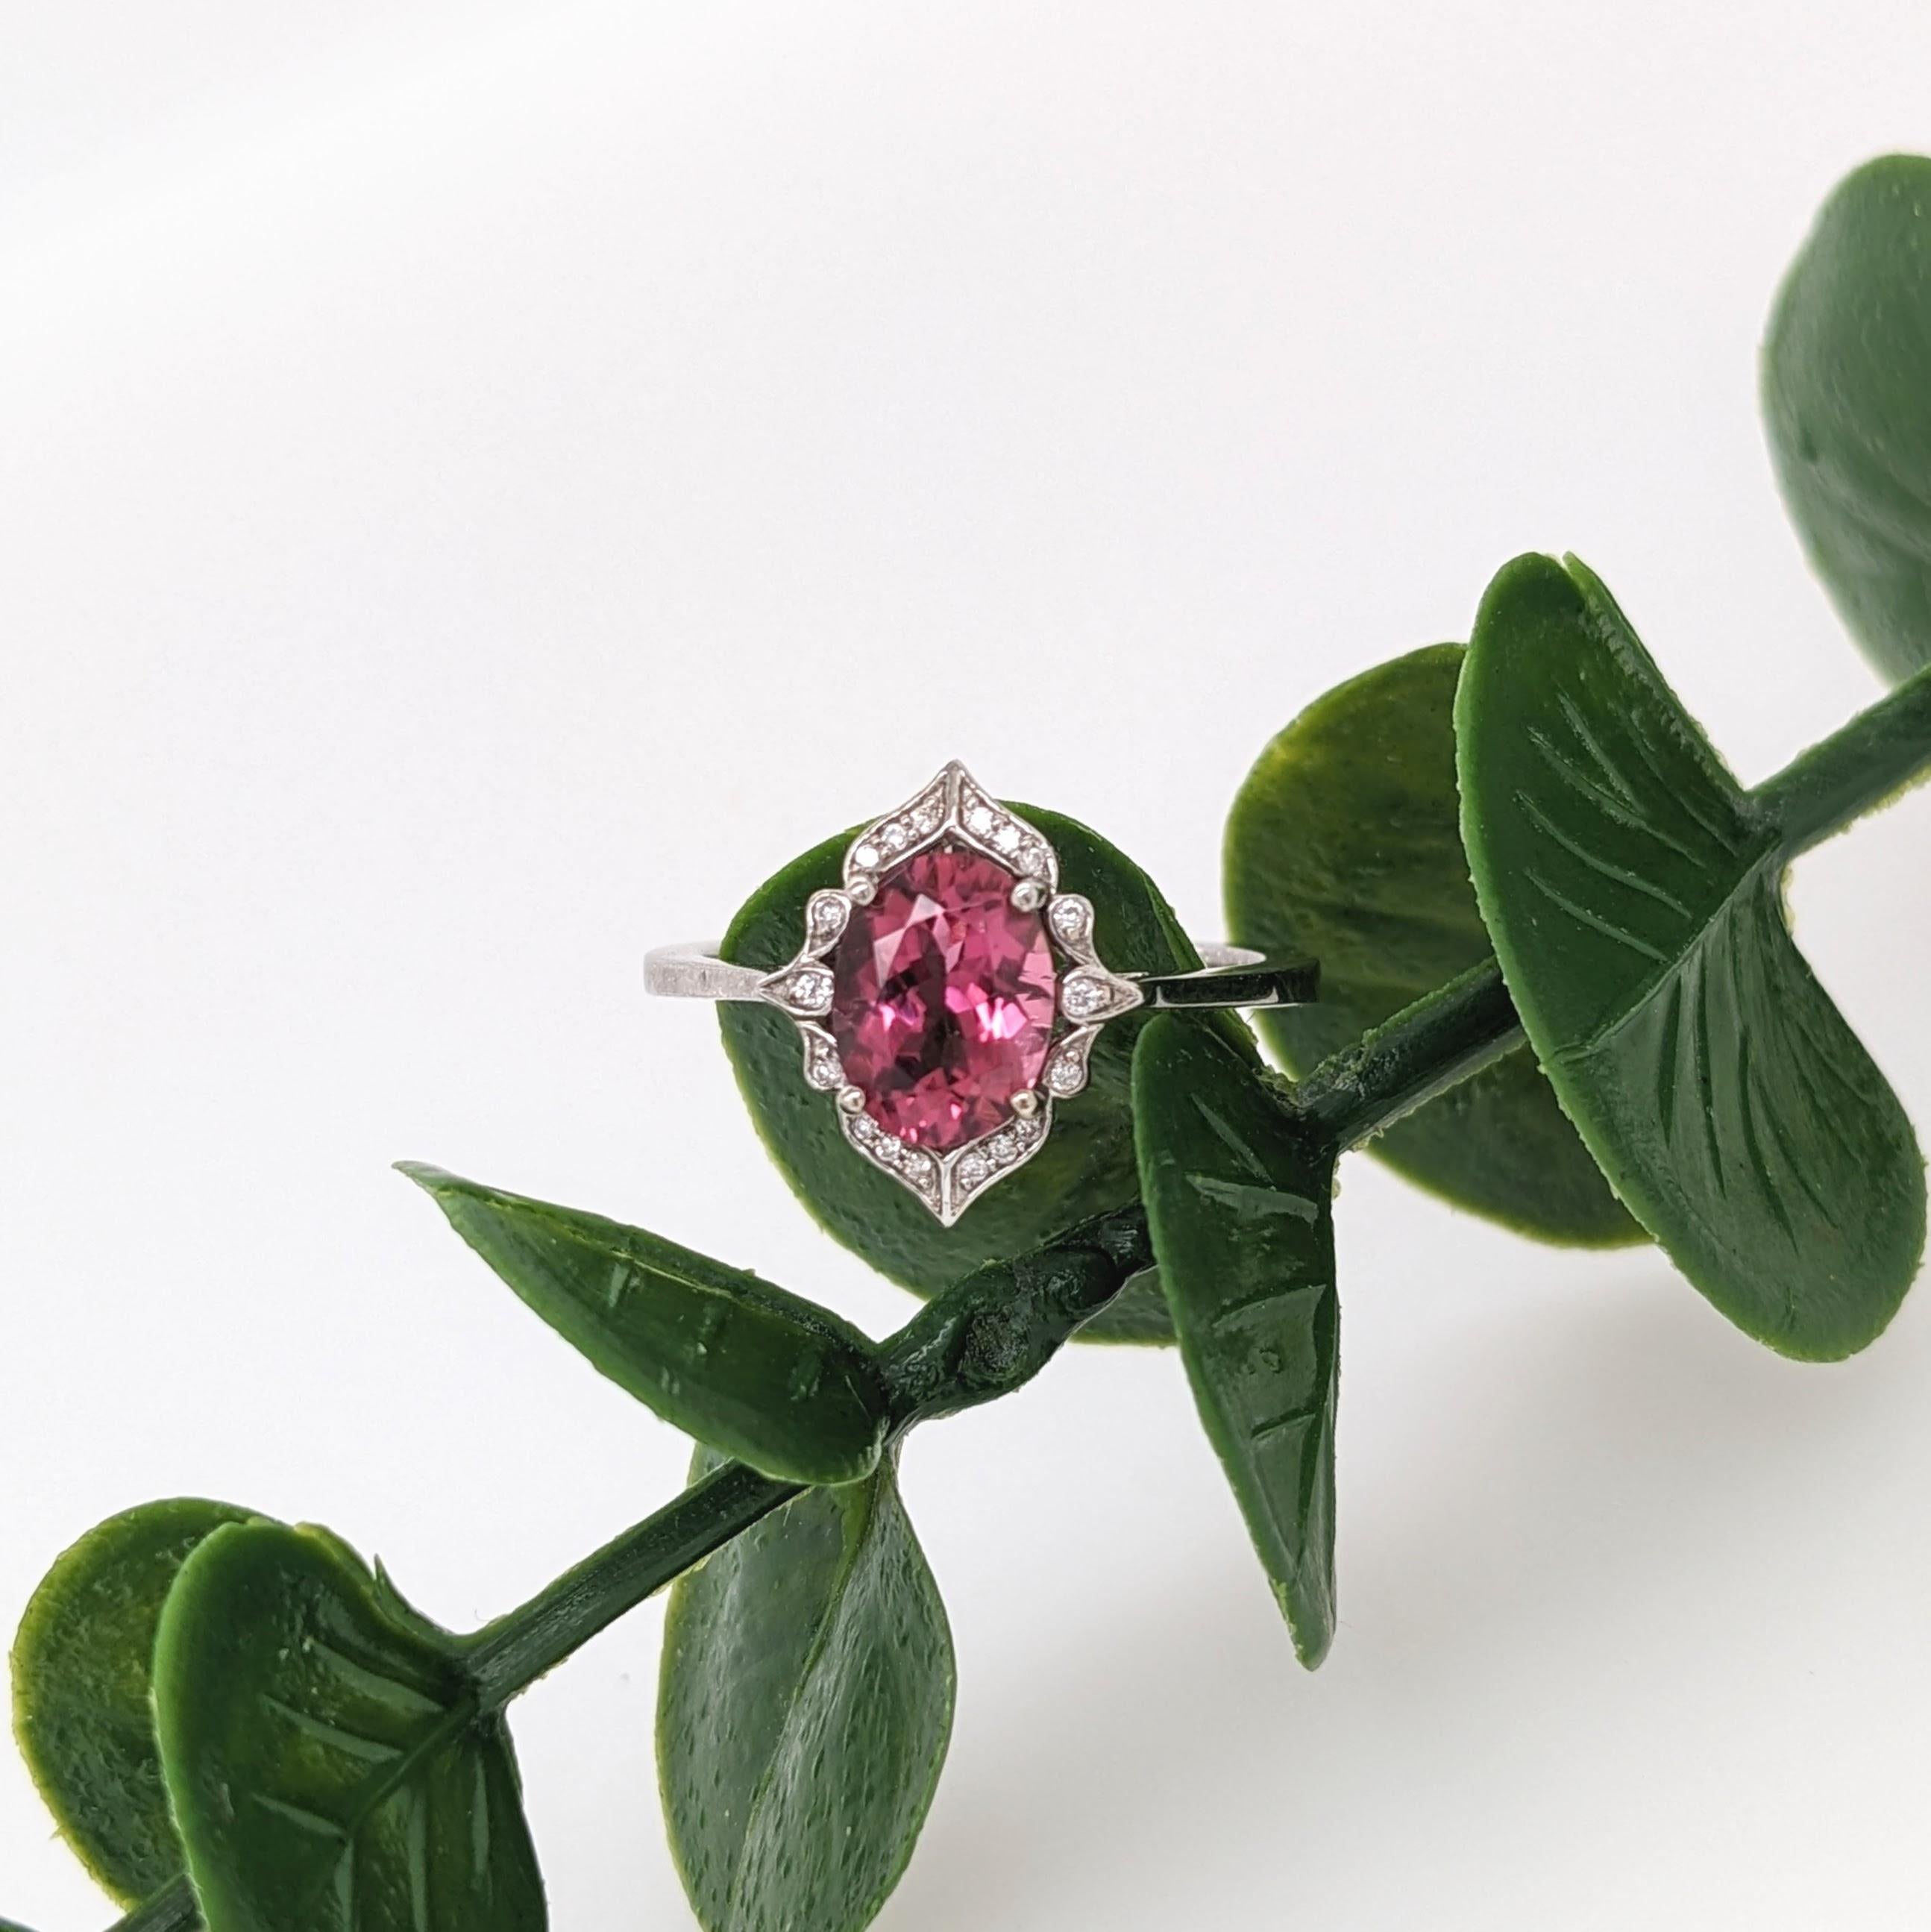 Women's 1.7ct Vintage Style Tourmaline Ring w Diamond Halo in 14K White Gold Oval 8x6mm For Sale